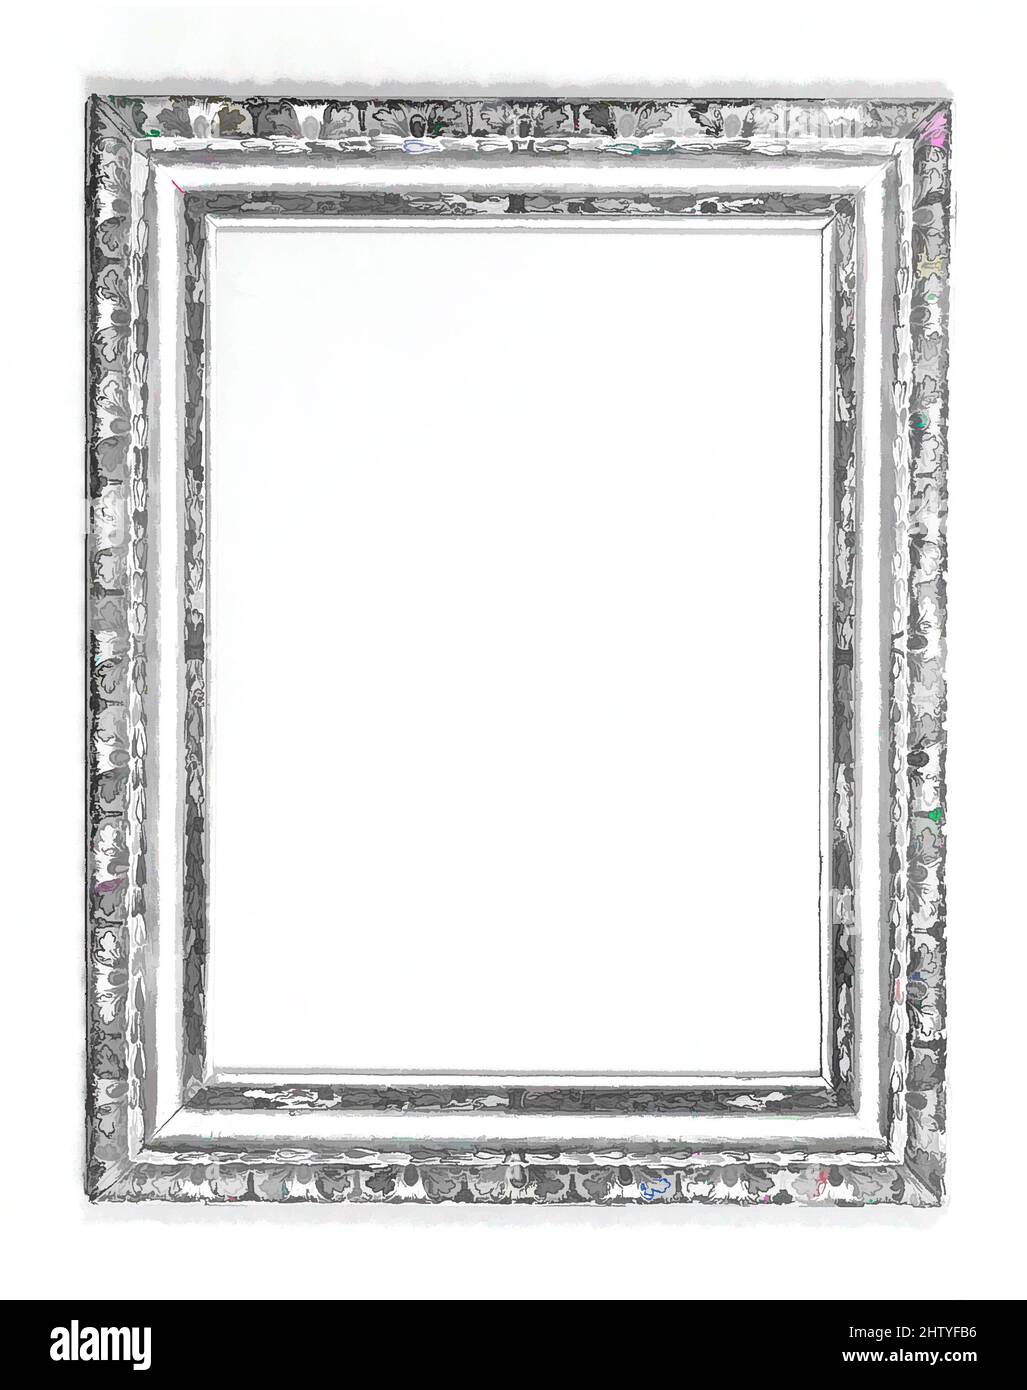 Art inspired by Neoclassical frame, mid-19th century, Italian, Emilia-Romagna, Poplar, 126.7 x 100, 96.9 x 69, 100.2 x 73.2 cm., Frames, Classic works modernized by Artotop with a splash of modernity. Shapes, color and value, eye-catching visual impact on art. Emotions through freedom of artworks in a contemporary way. A timeless message pursuing a wildly creative new direction. Artists turning to the digital medium and creating the Artotop NFT Stock Photo